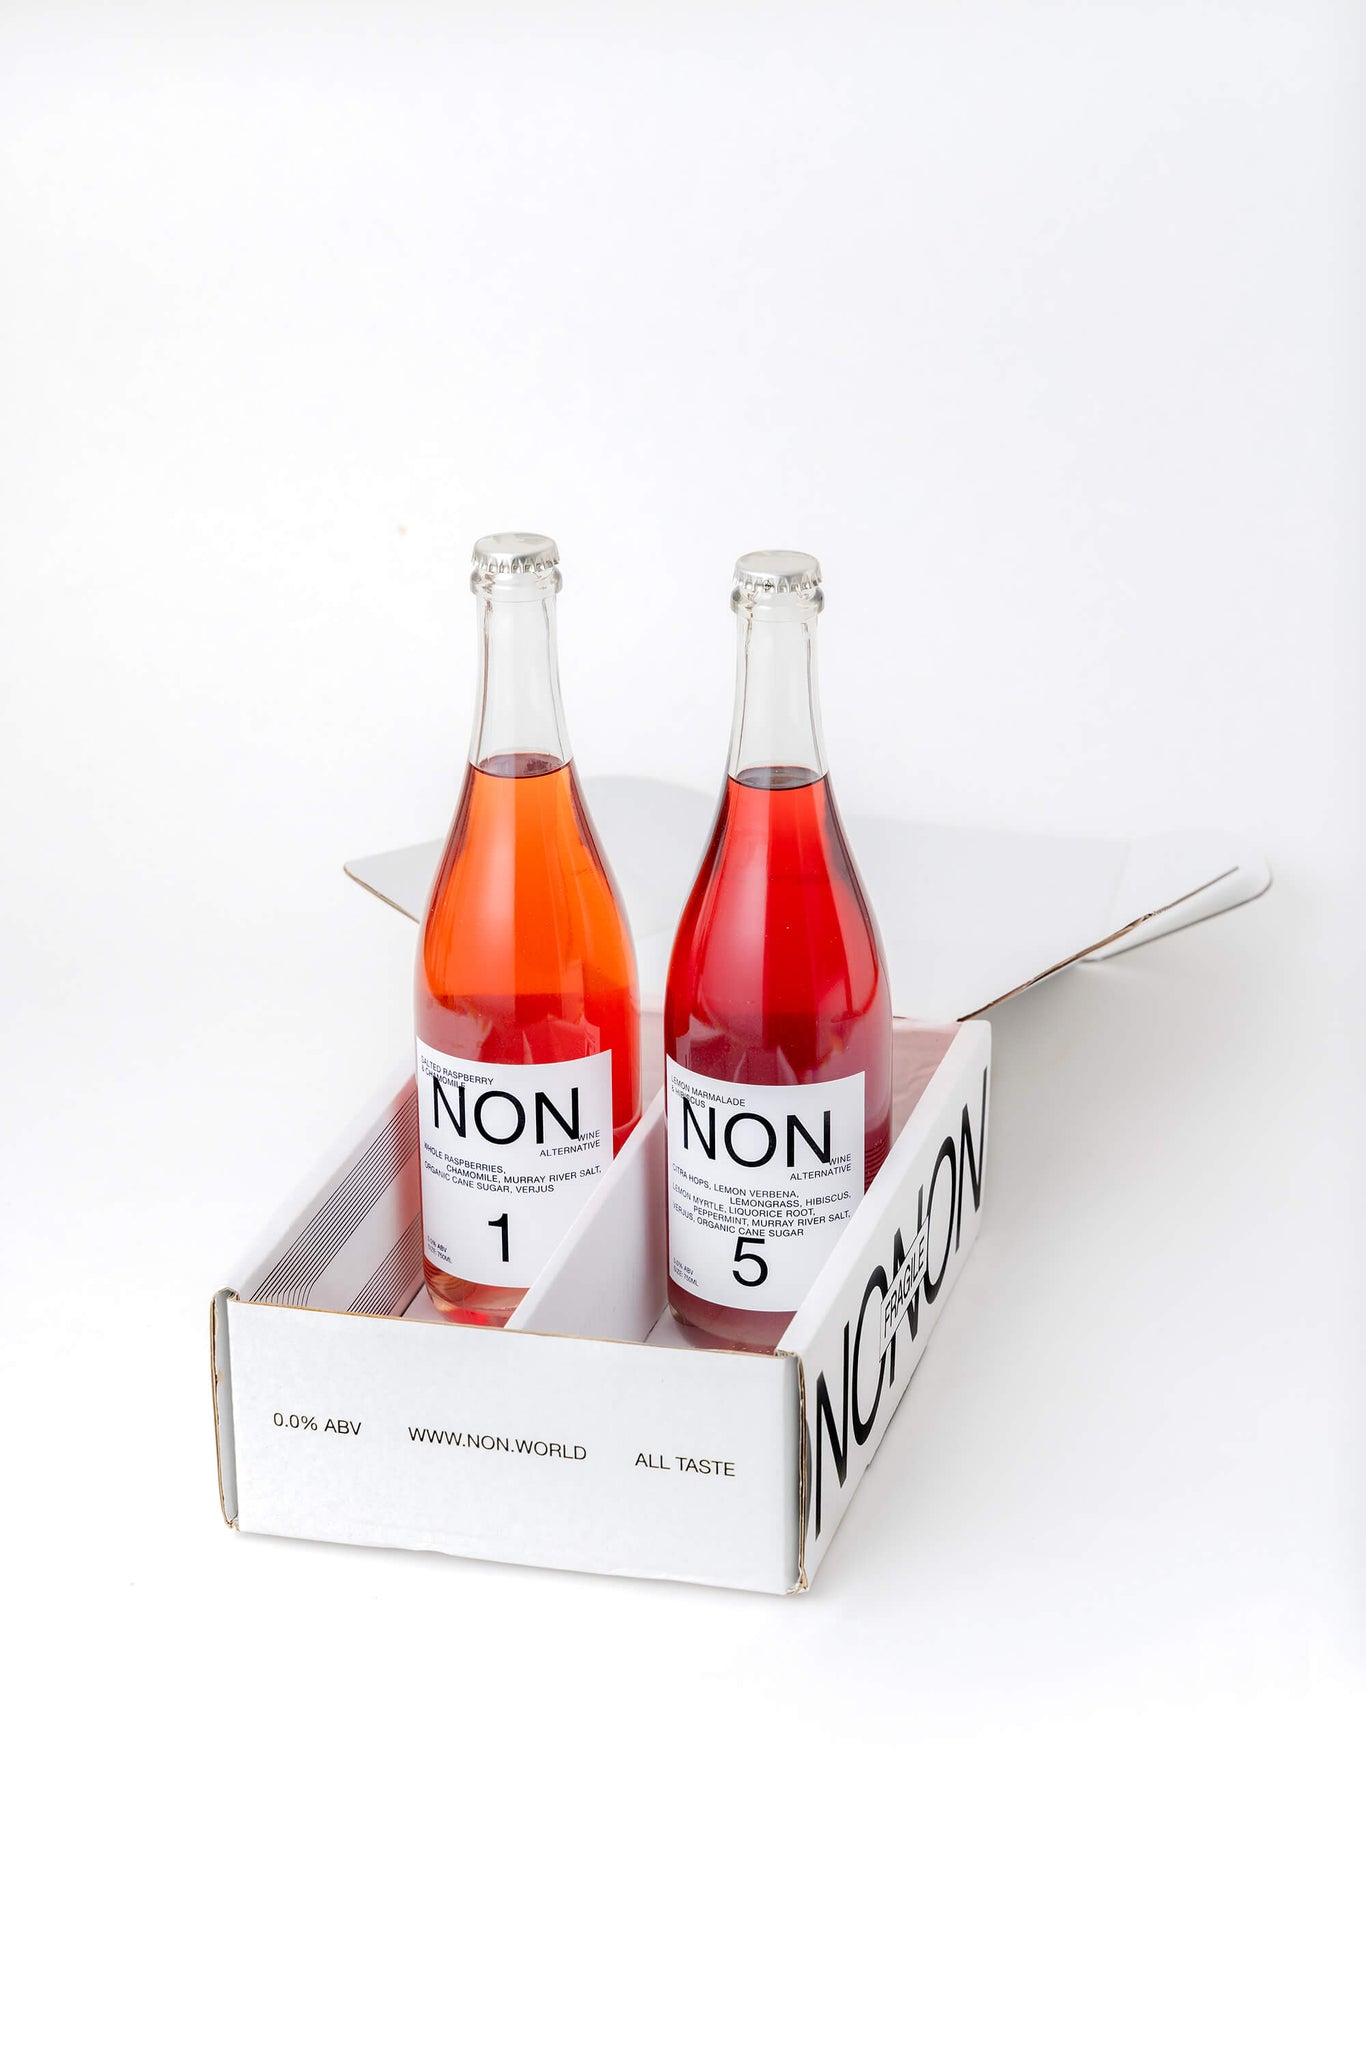 NON Blush Set 2-pack packaging NON1 NON5 Standing Up